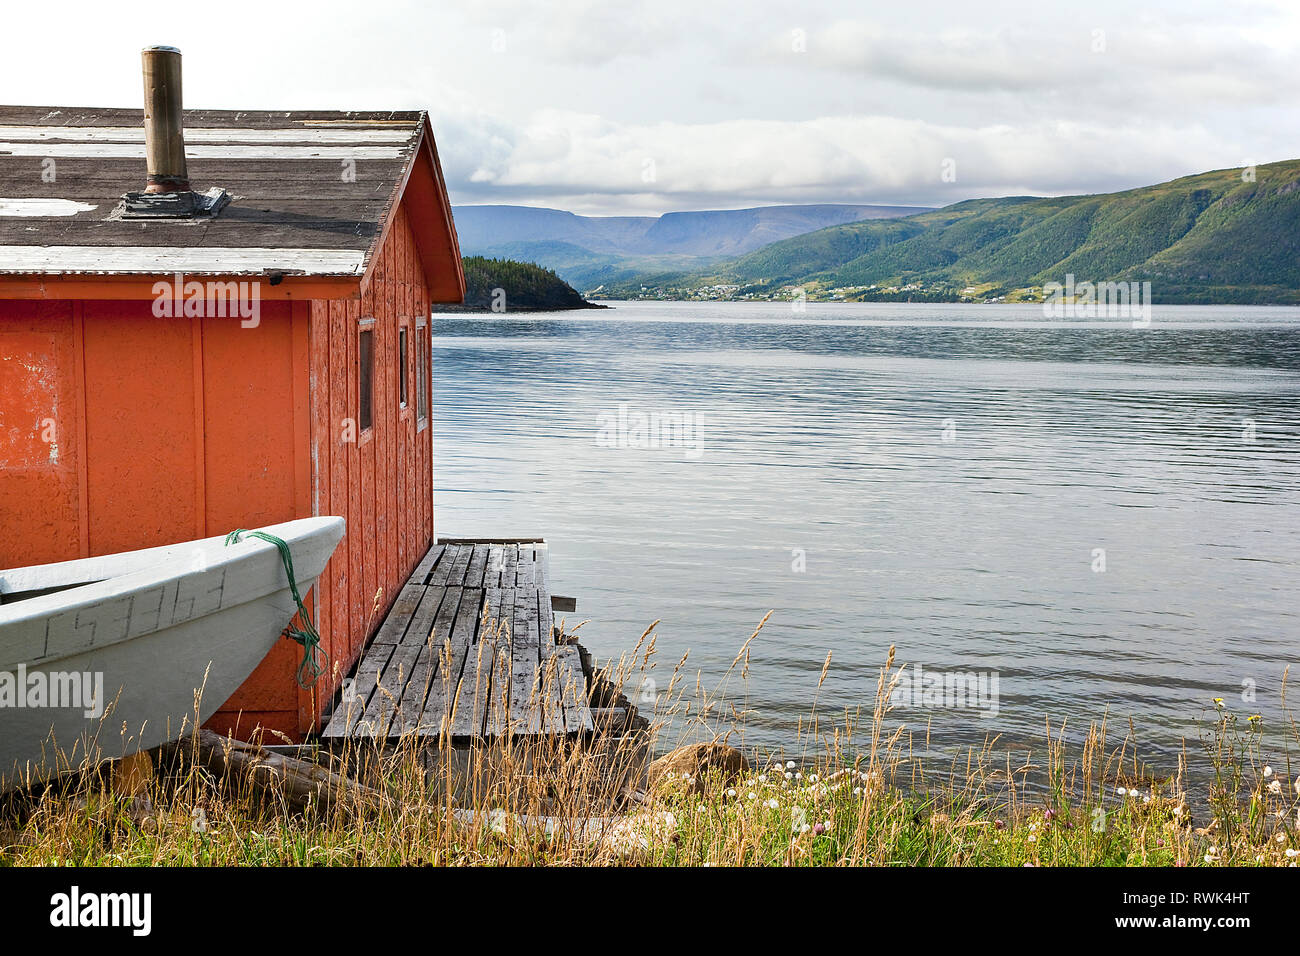 Fisherman's shed and bow of a fishing boat on the shore of Wild Cove, Bonne Bay, Gros Morne National Park, Newfoundland, Canada Stock Photo